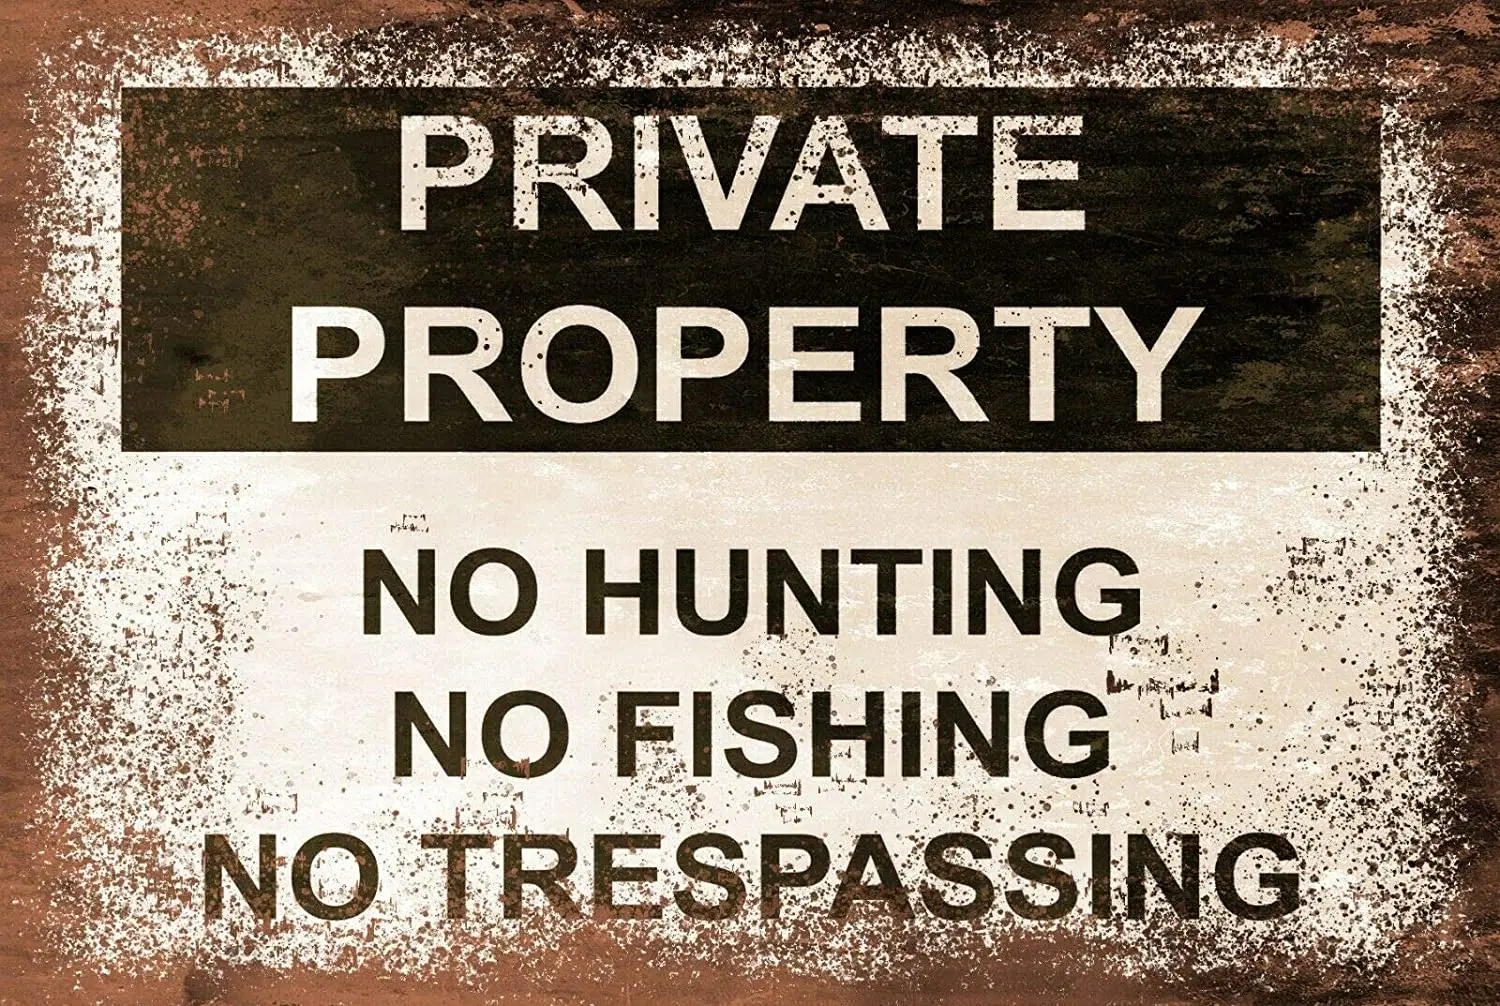 garages interior Private Property No Hunting Fishing Trespassing metal tin sign 